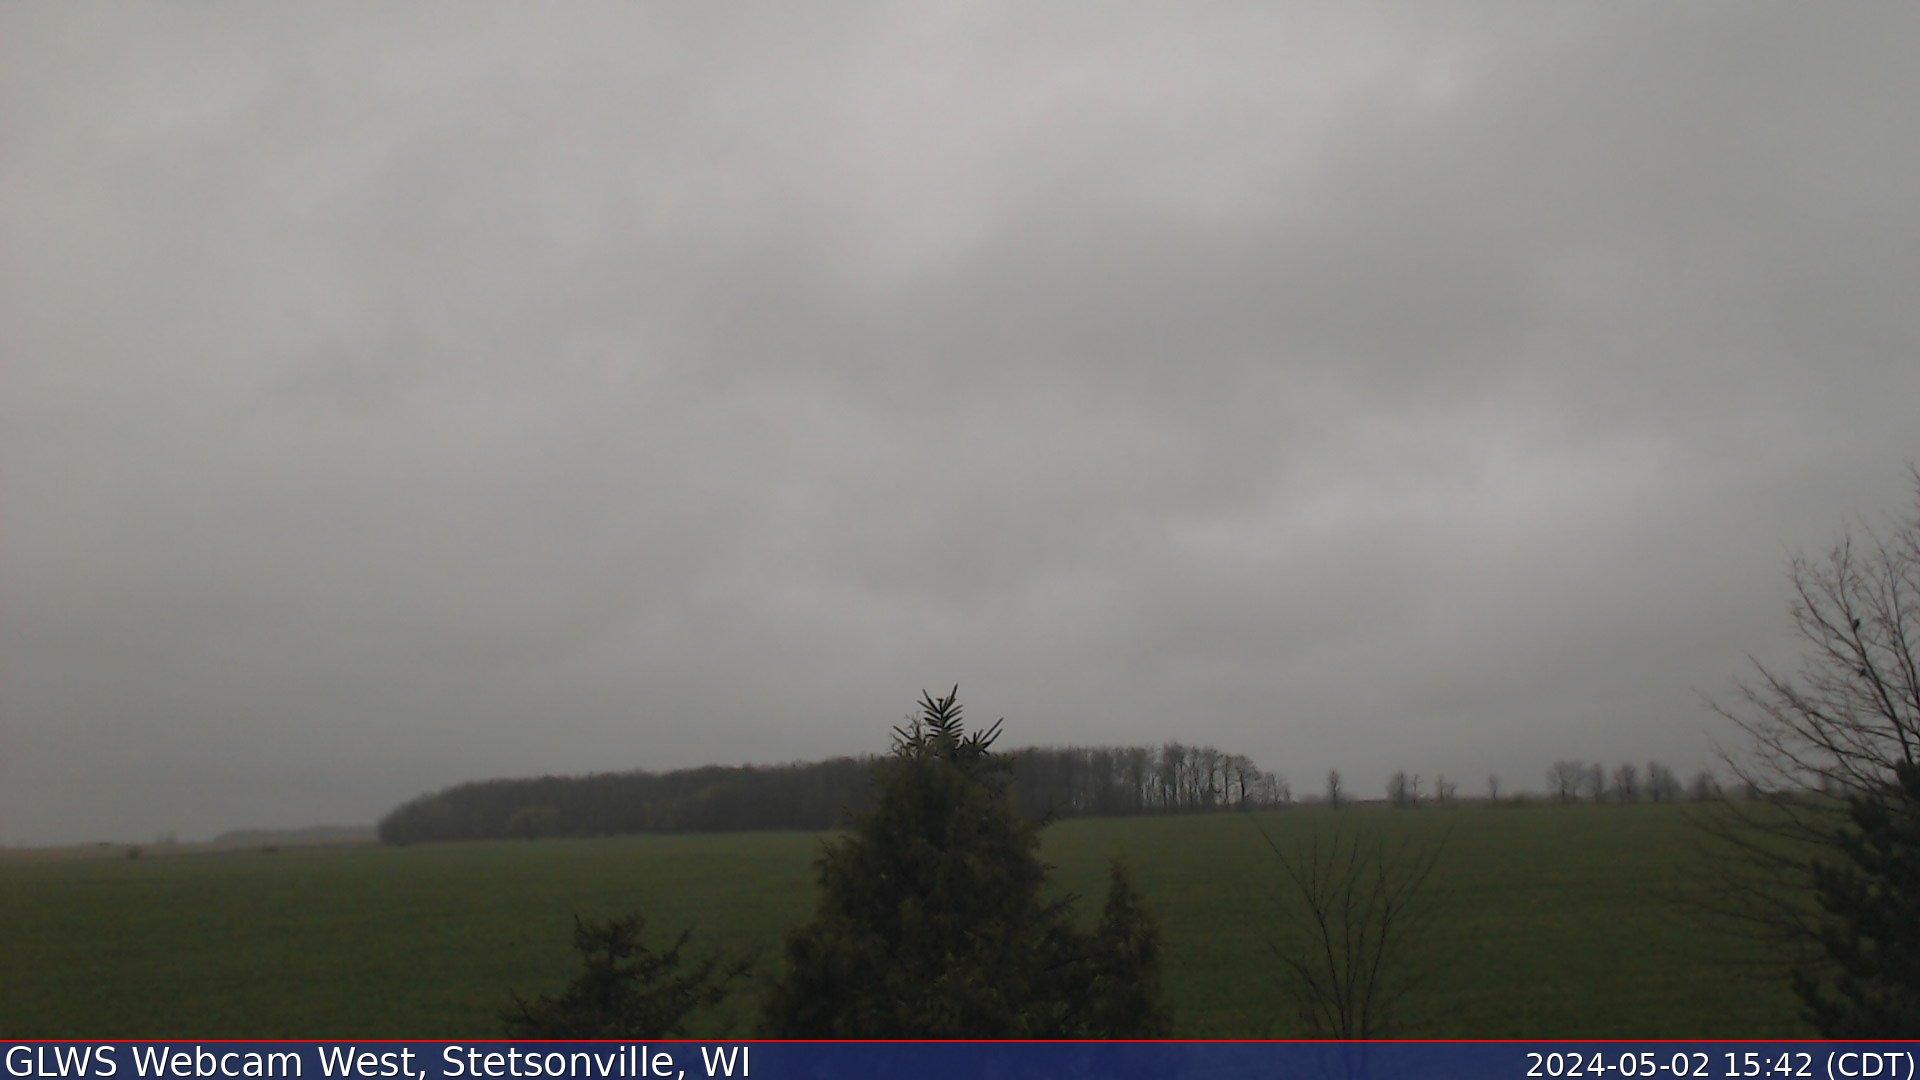 Stetsonville › West: Great Lakes Weather Service Traffic Camera